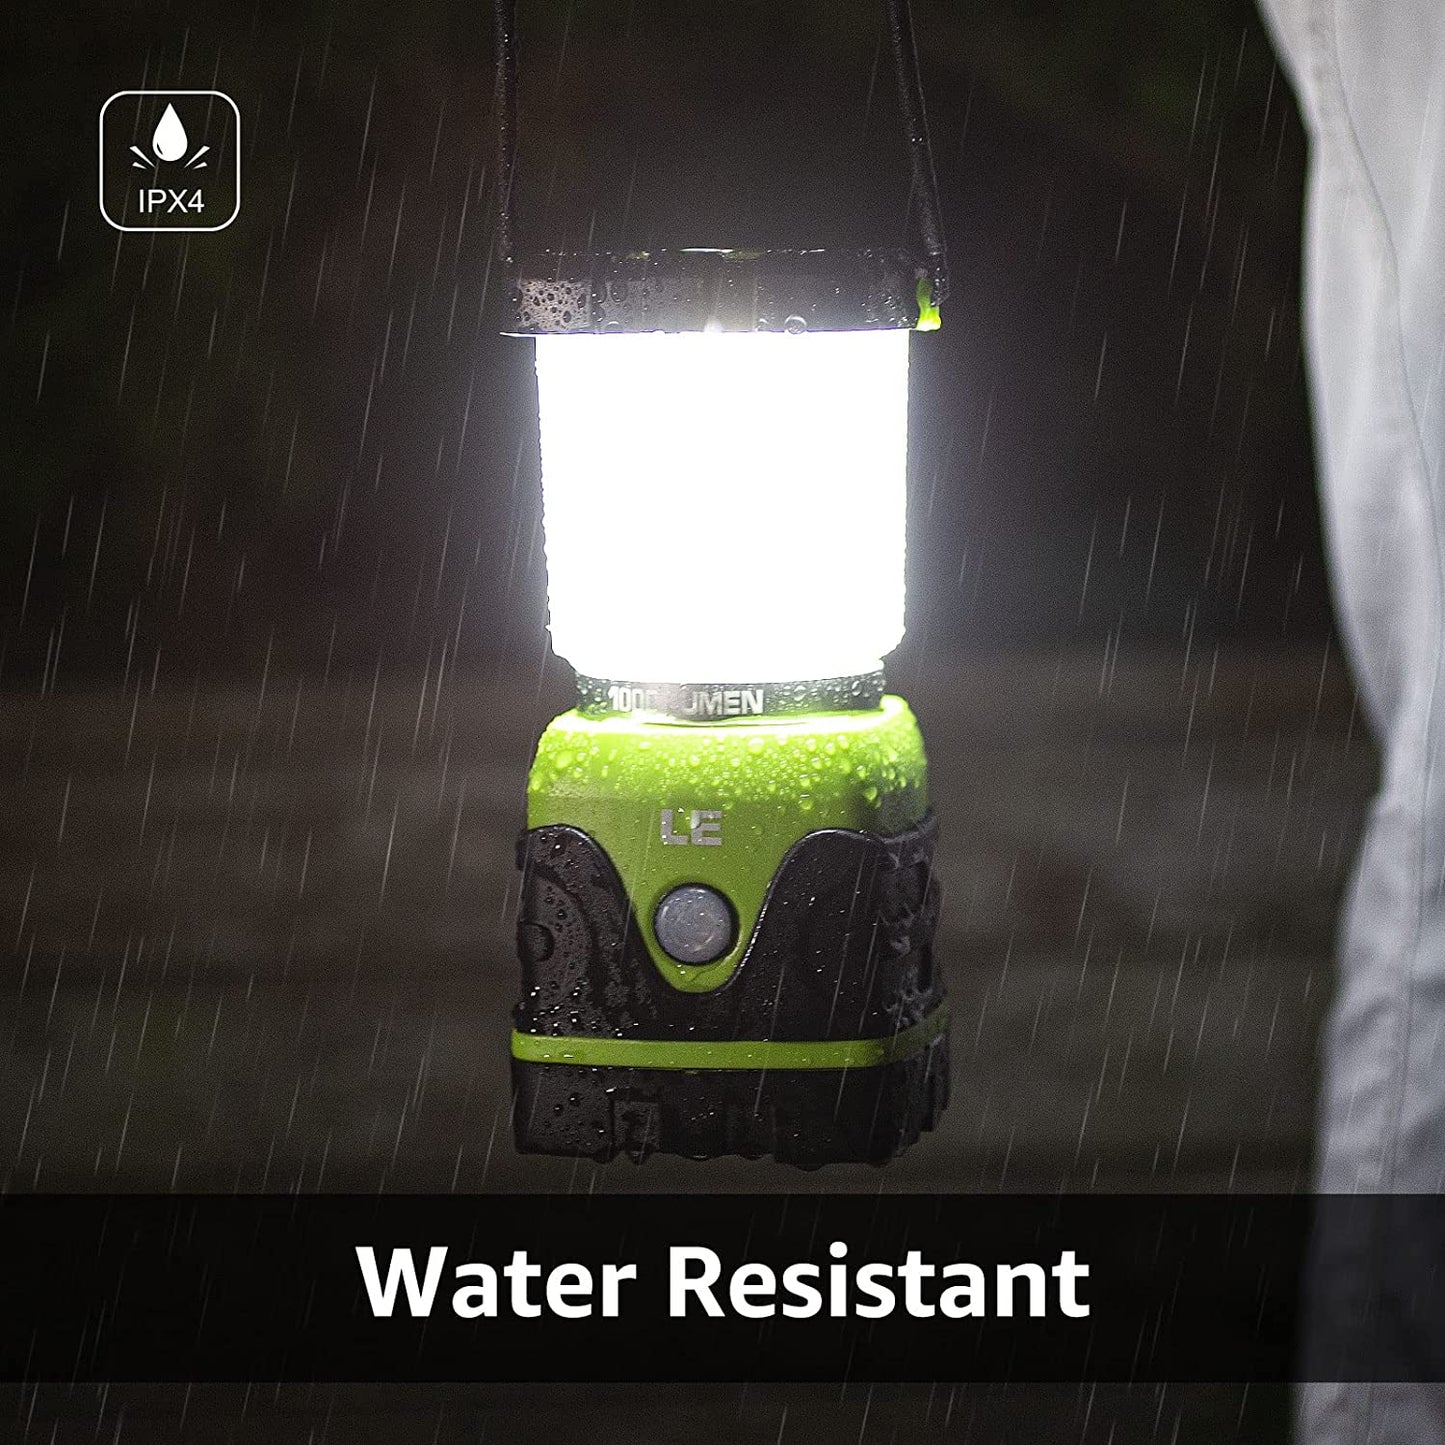 LE LED Camping Lantern, Battery Powered 1000lm Black and Green